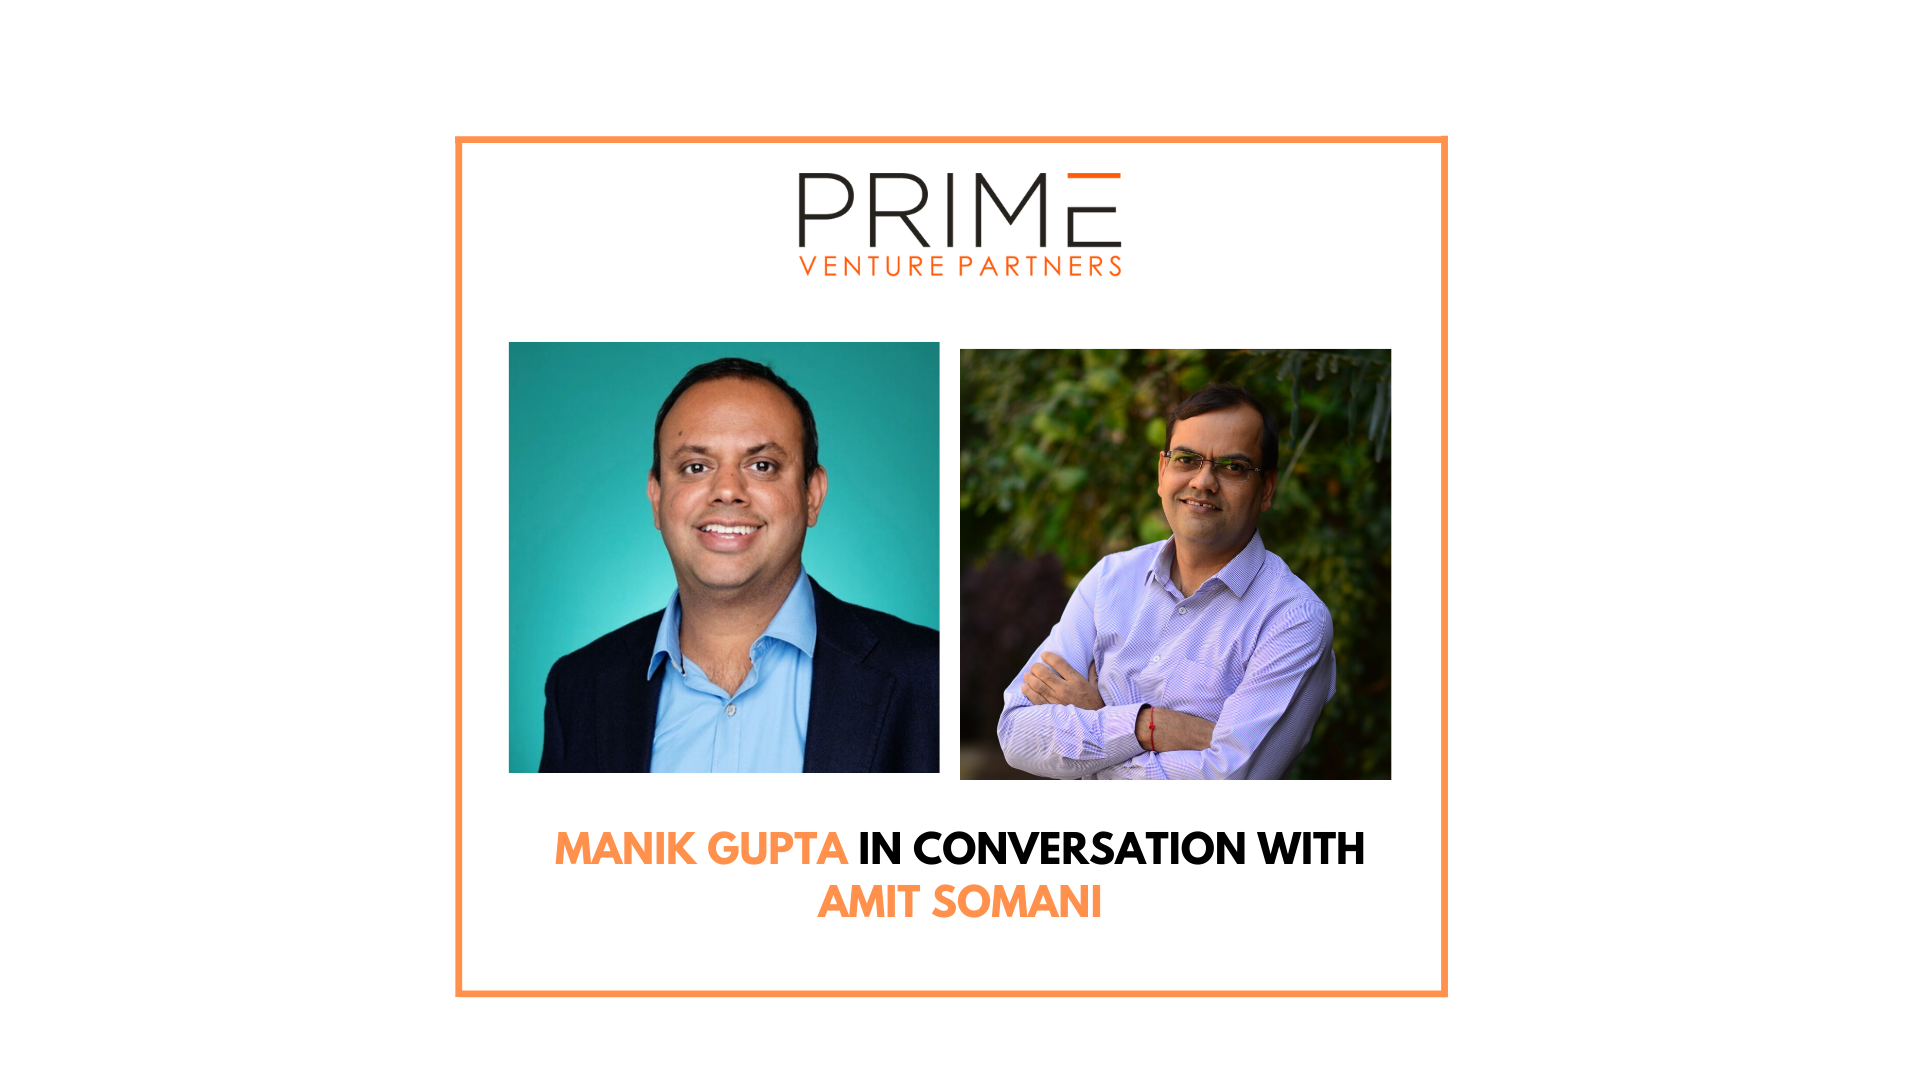 A graphic with guest(Manik Gupta) and host's (Amit Somani) name and image.